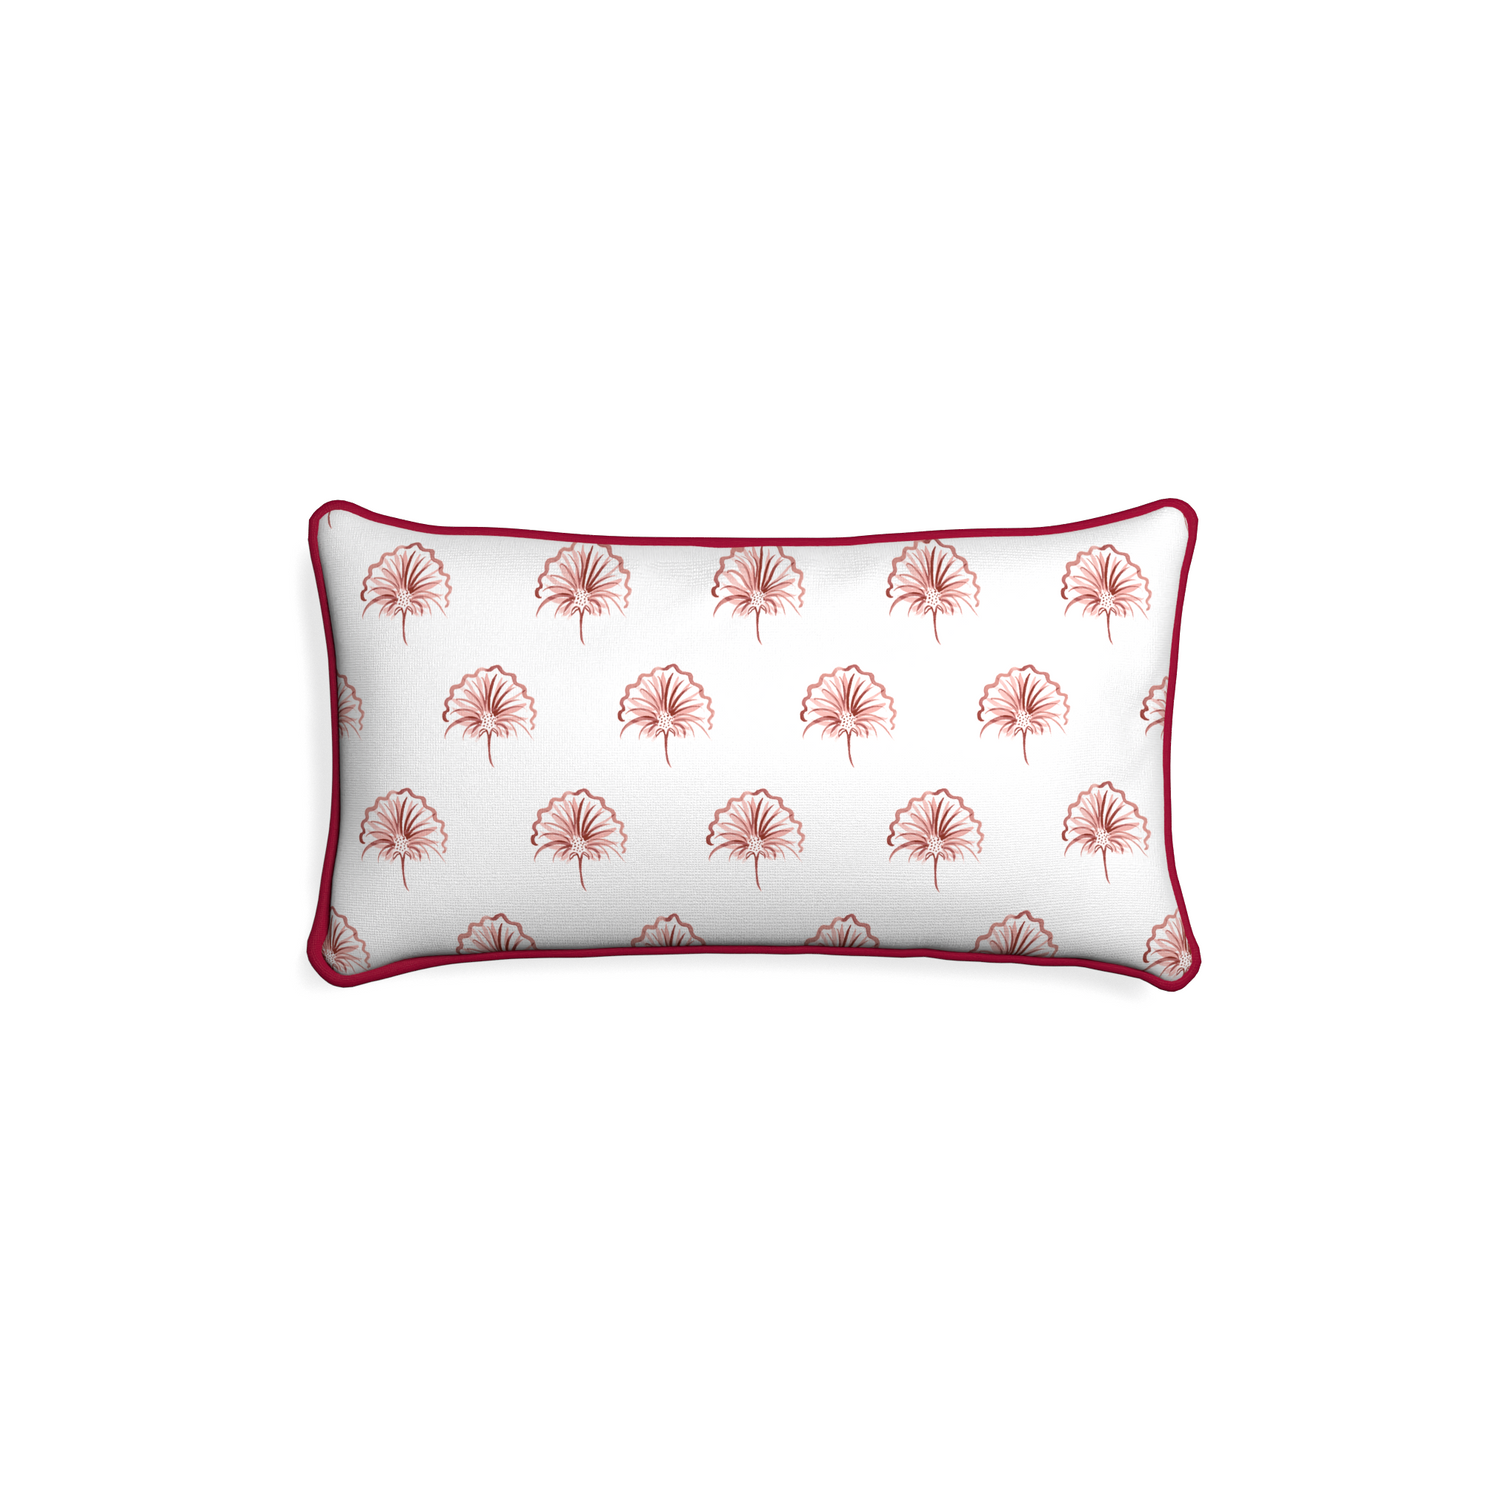 Petite-lumbar penelope rose custom floral pinkpillow with raspberry piping on white background